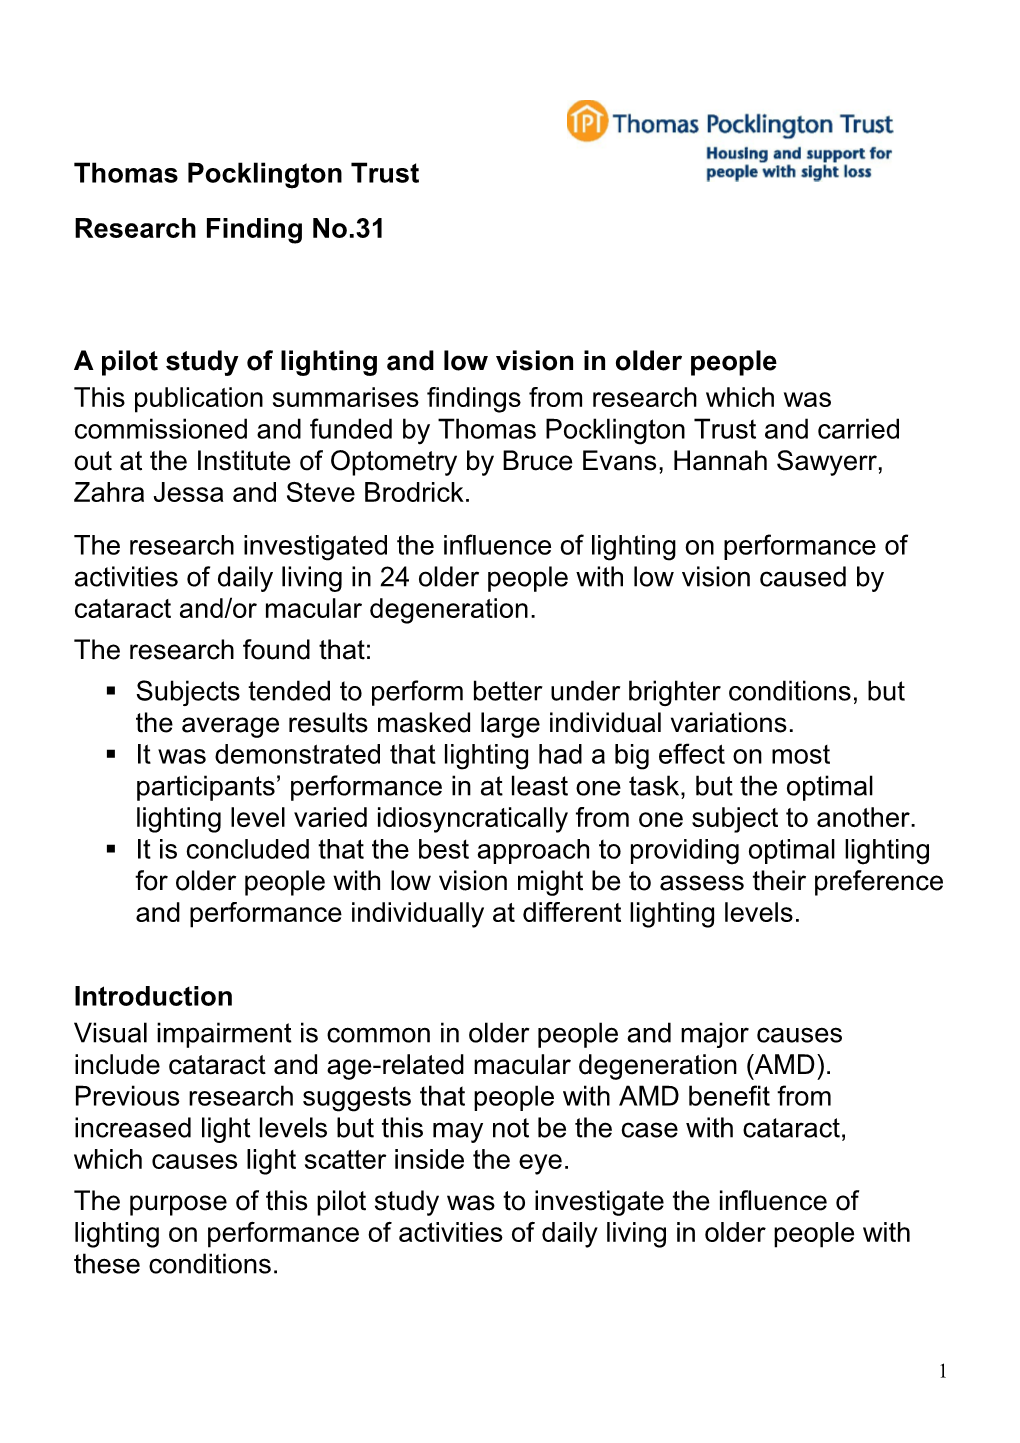 A Pilot Study of Lighting and Low Vision in Older People